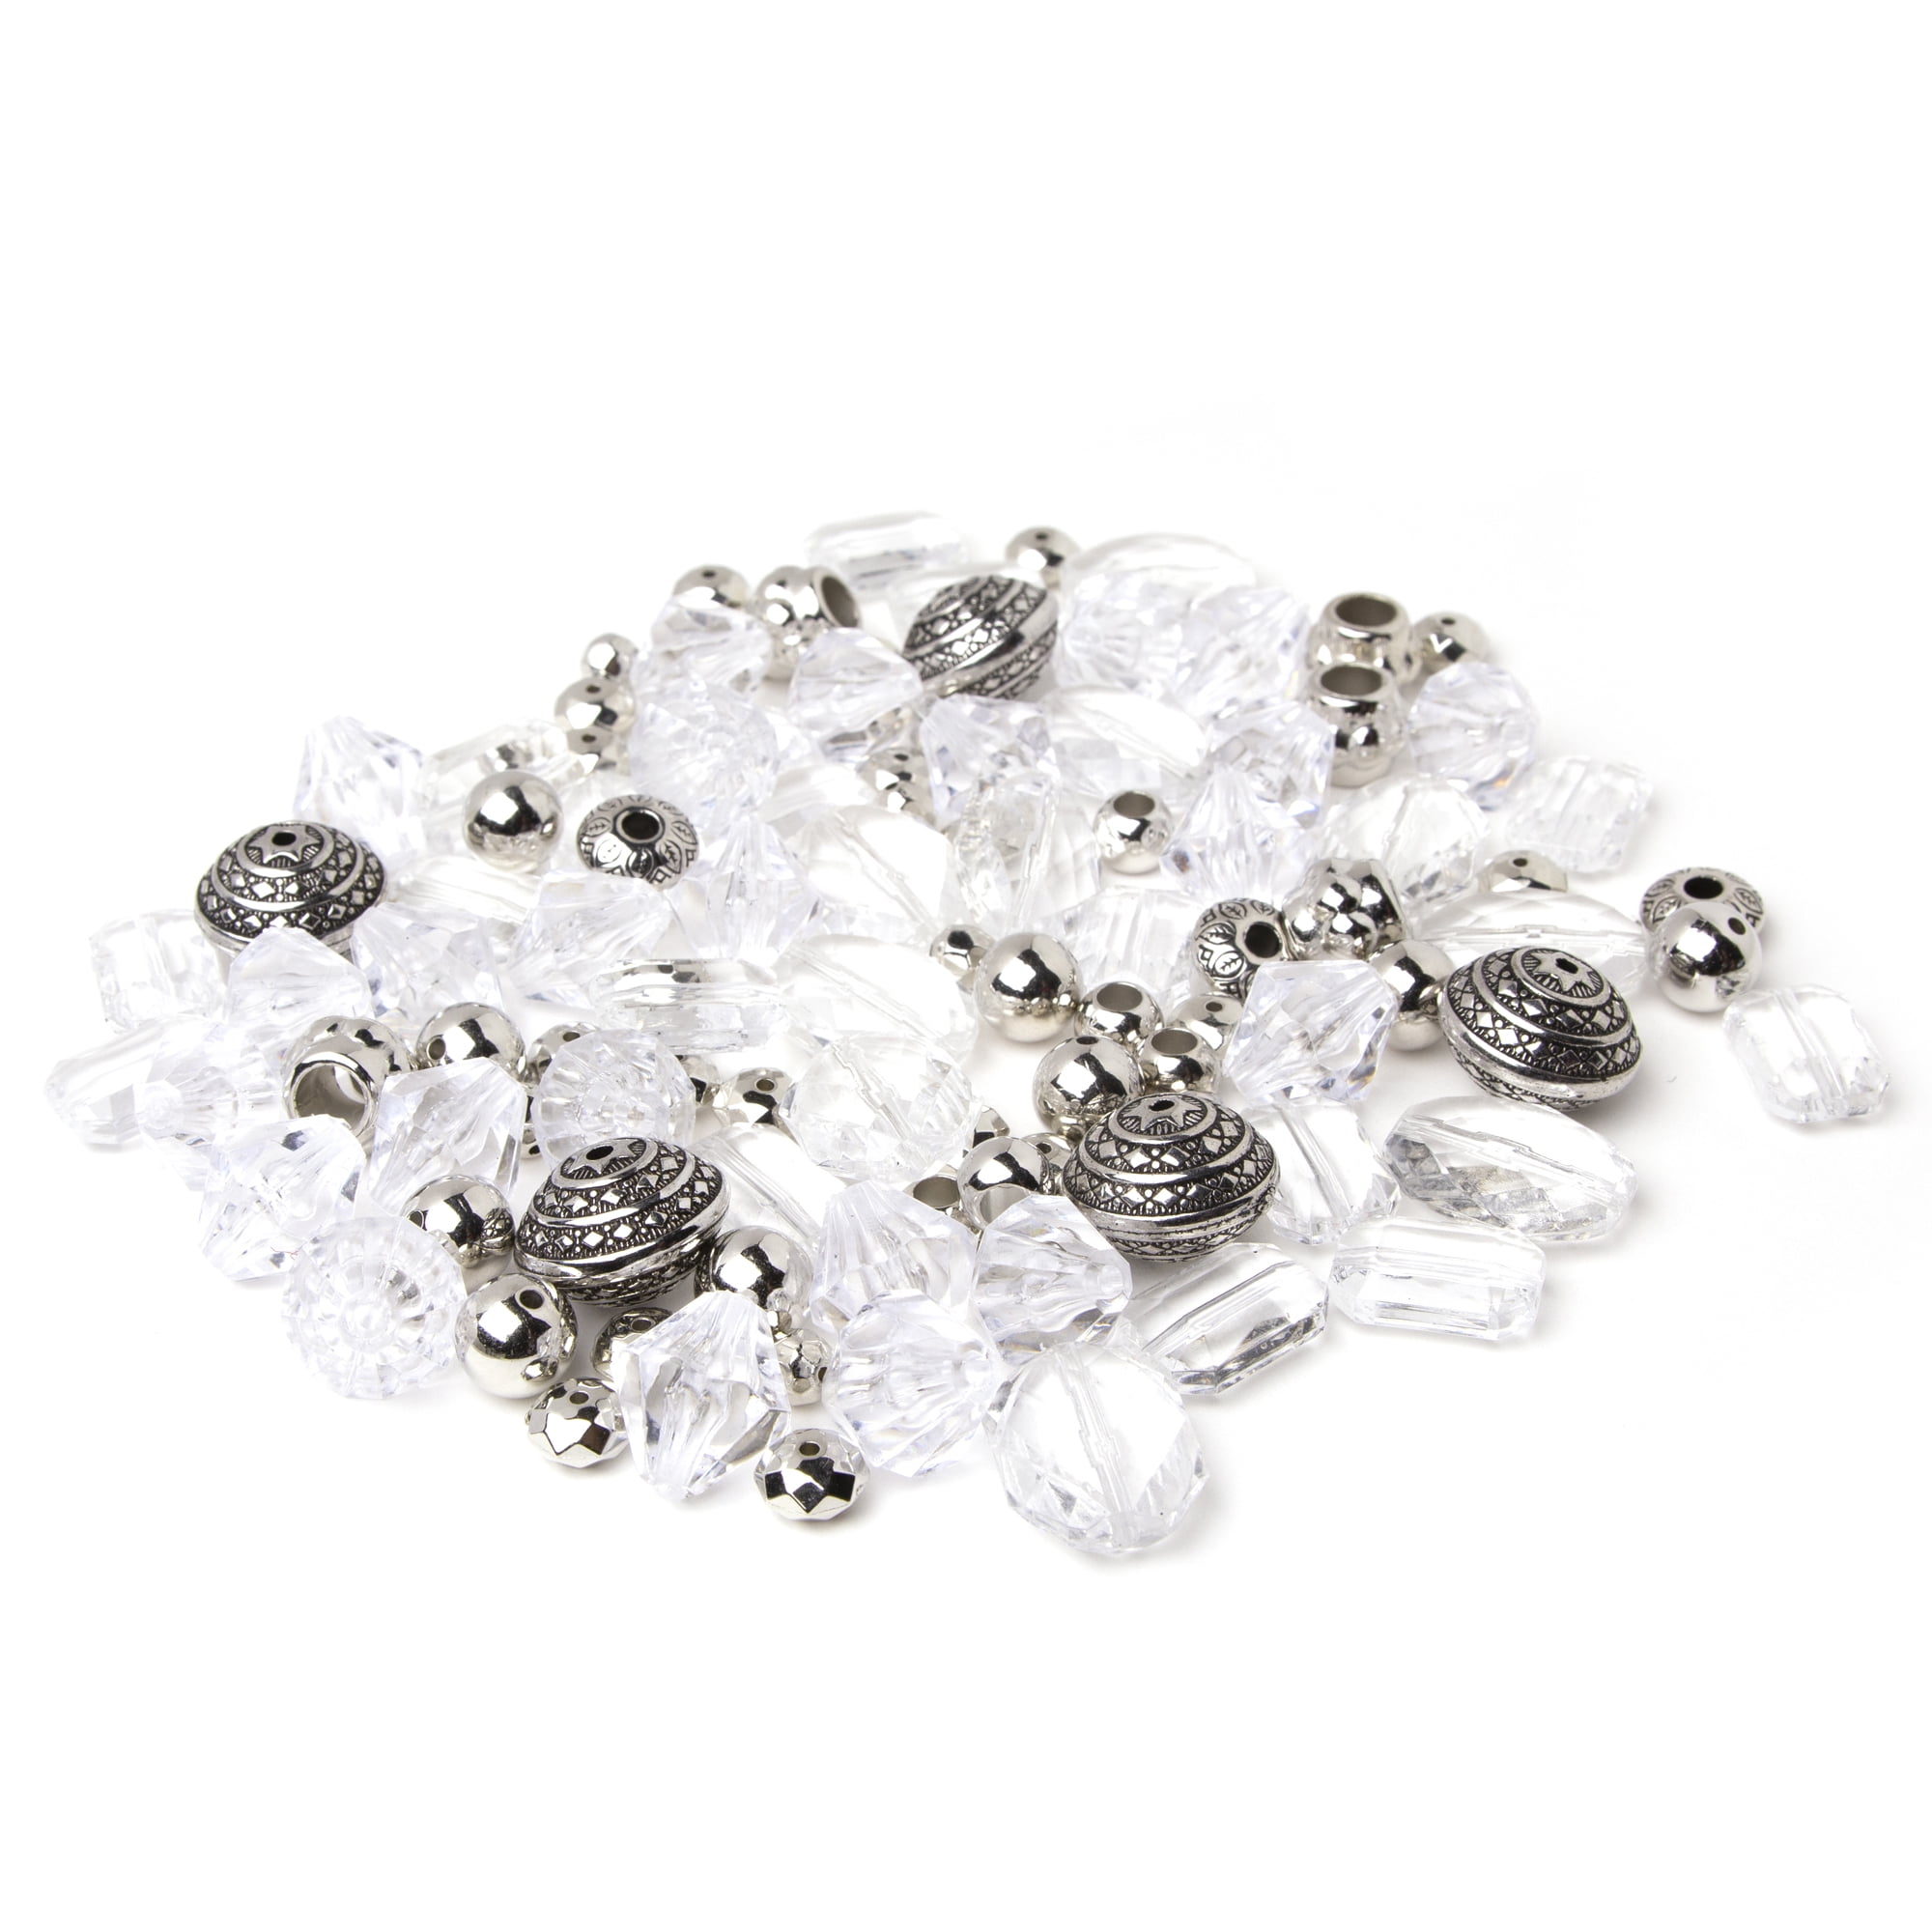 VIVP Coffee Assorted Beads for Jewelry Making Mix Crystal Glass Round Beads  Acrylic Natural Stone Beads Pearl Beads Pony Beads Spacer Beads for DIY